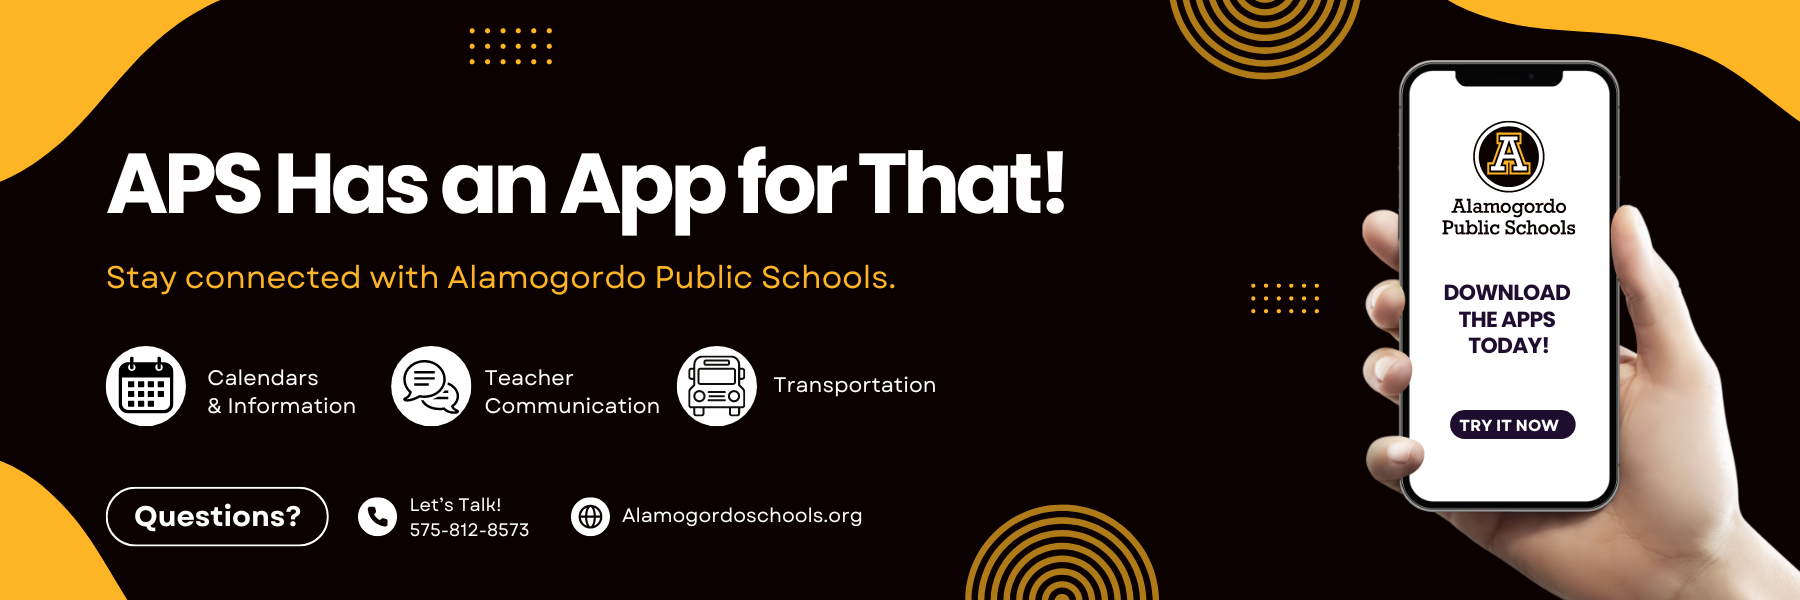 APS has an App for That! Graphic